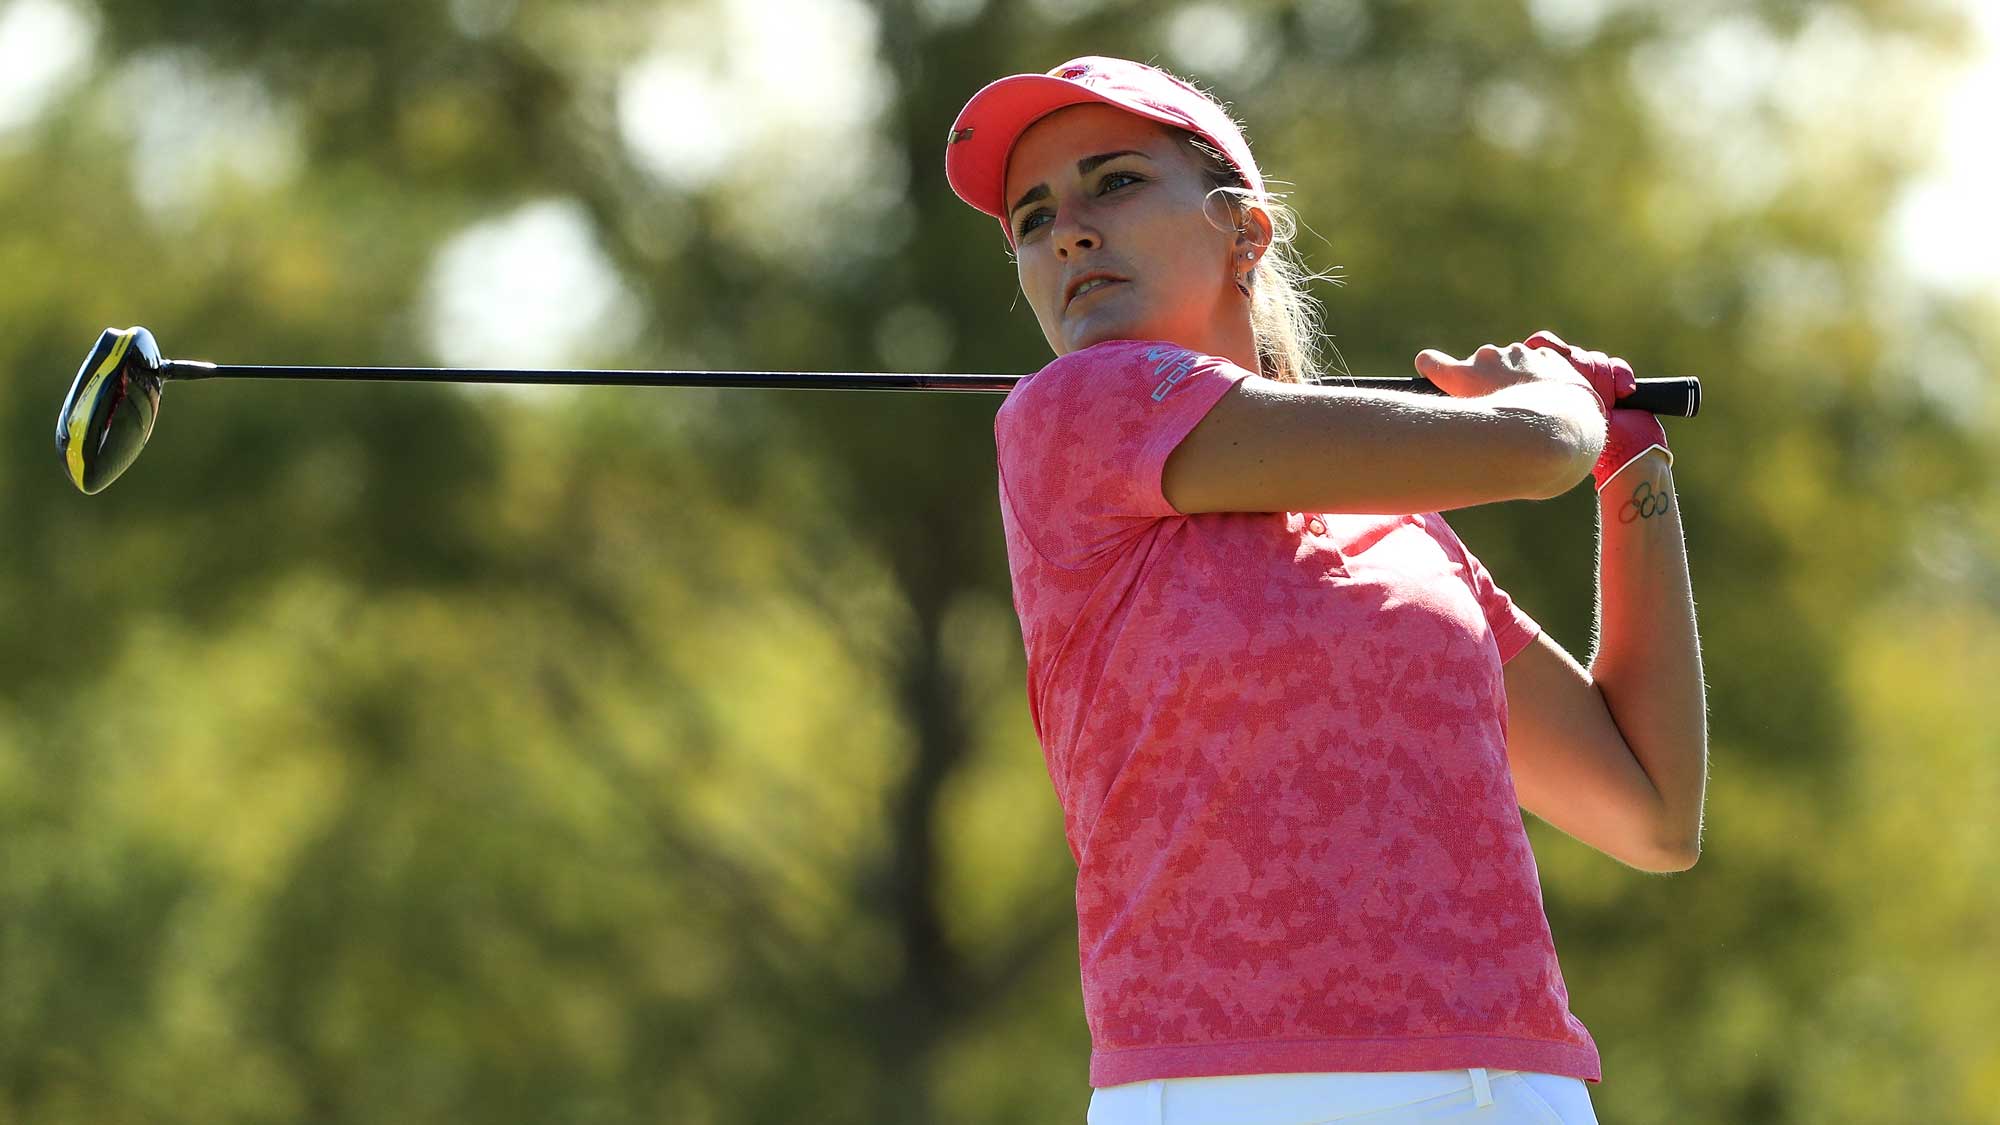 Lexi Thompson plays her shot from the third tee during the third round of the LPGA CME Group Tour Championship